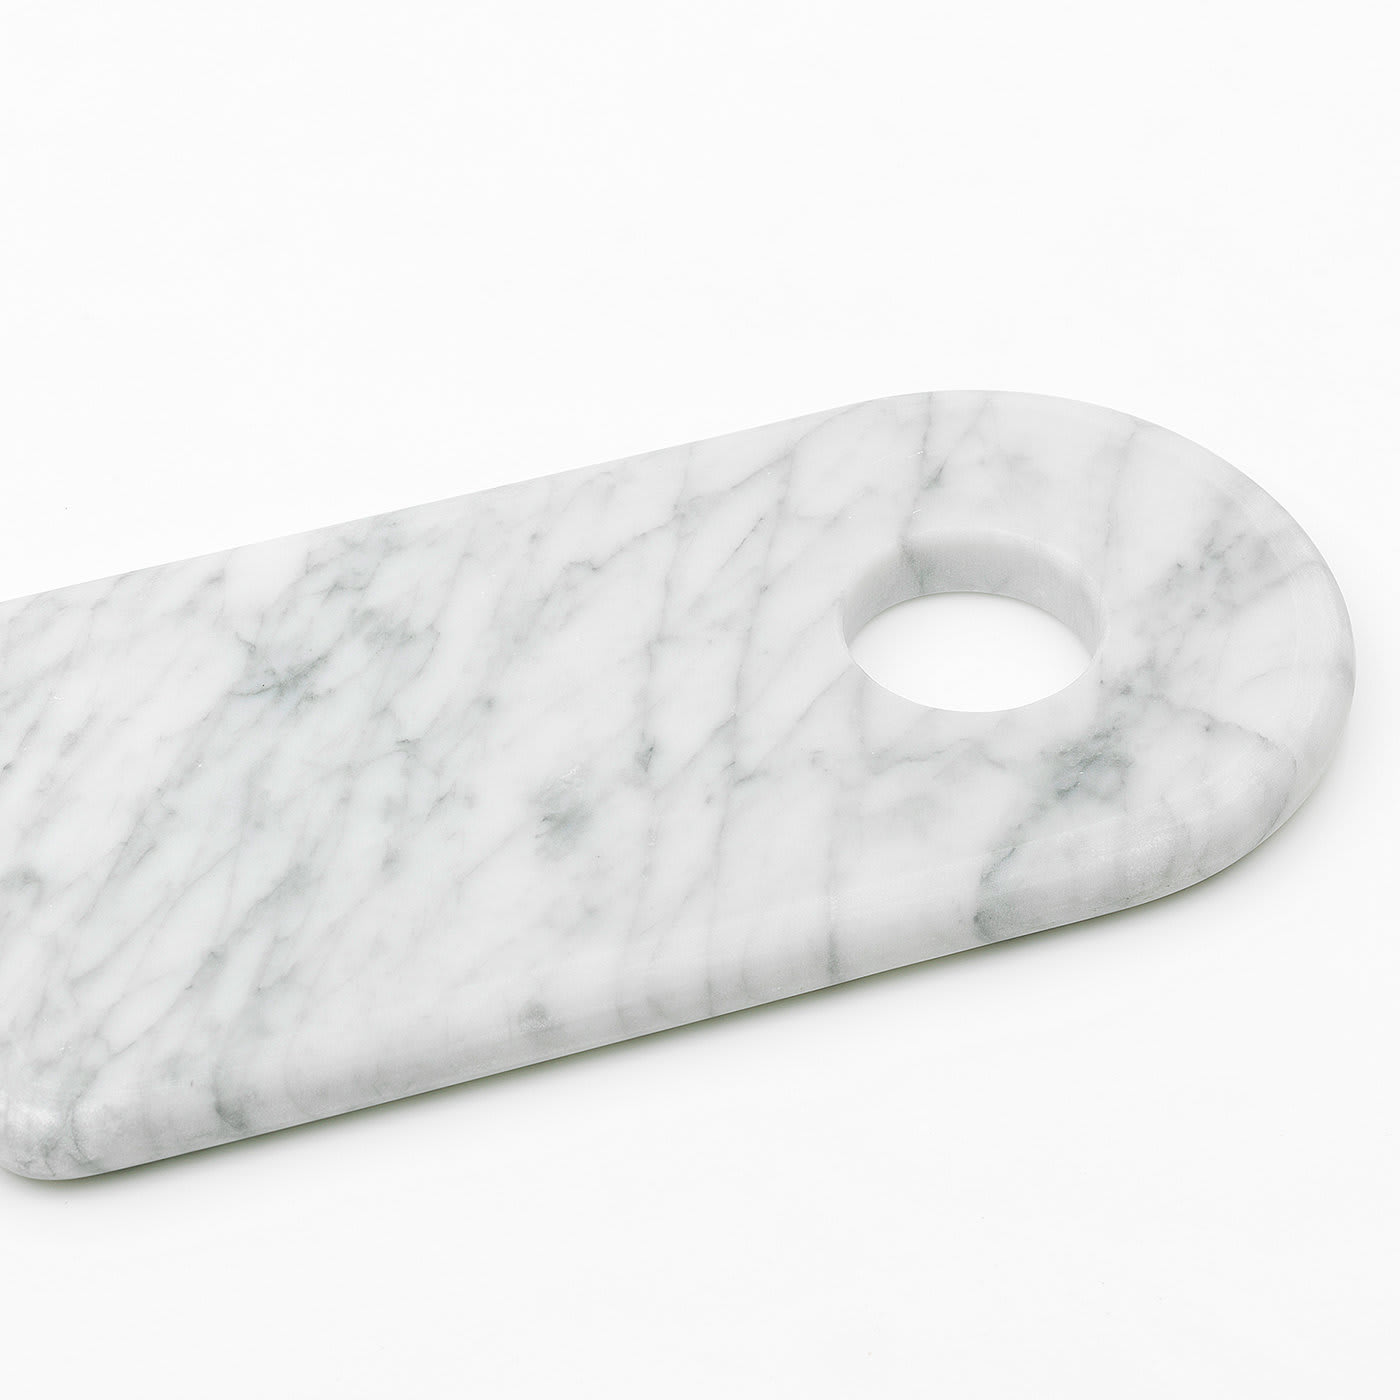 White Marble Cutting Board with Hole - FiammettaV Home Collection